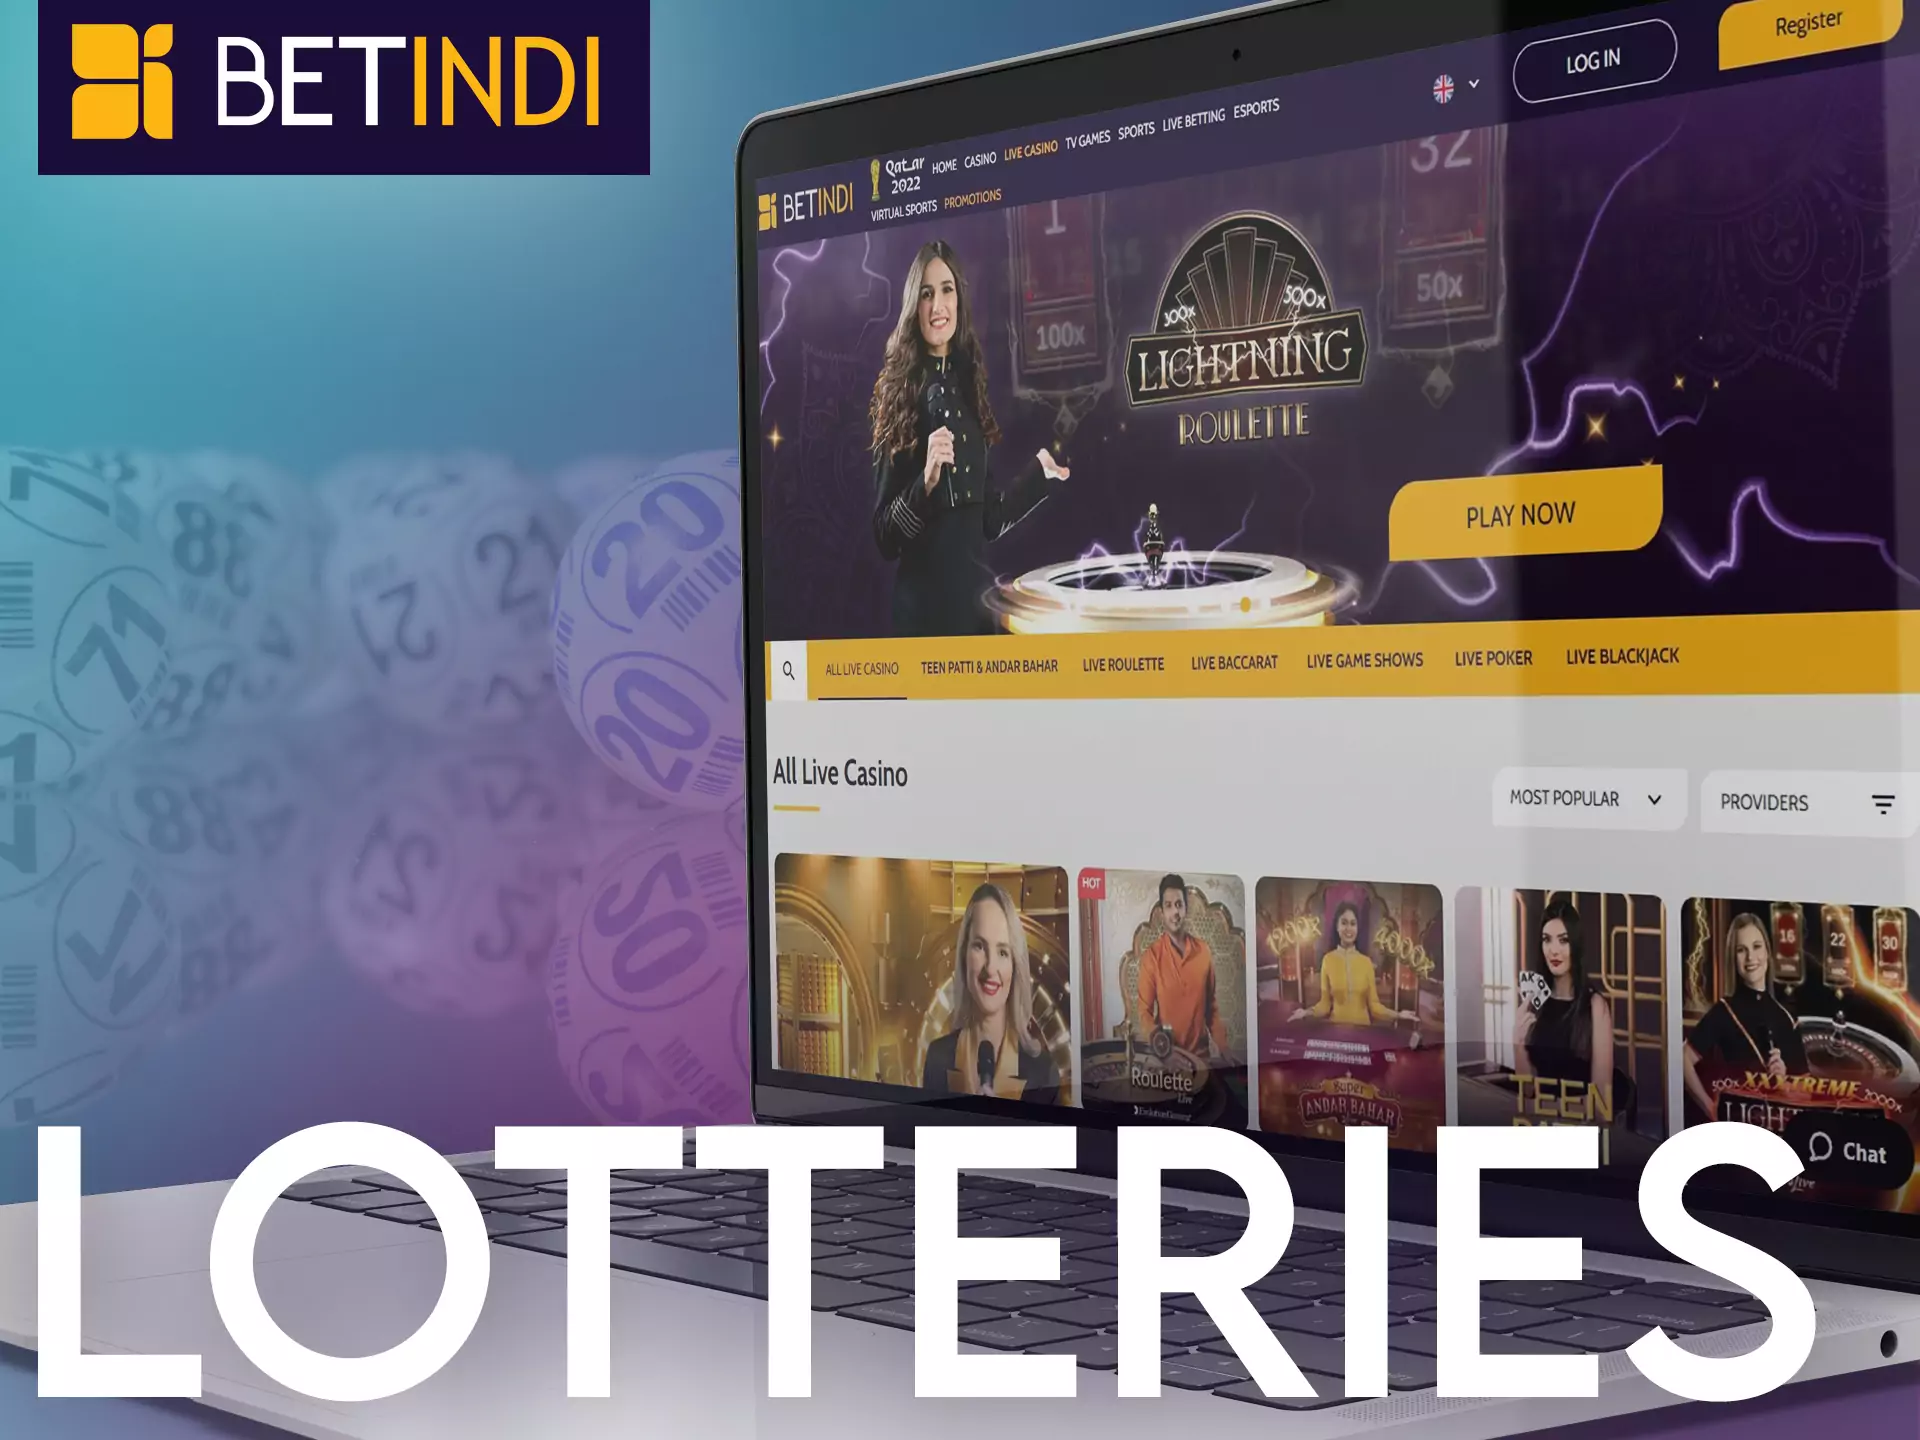 Play the lottery on Betindi, try your luck and enjoy the game.